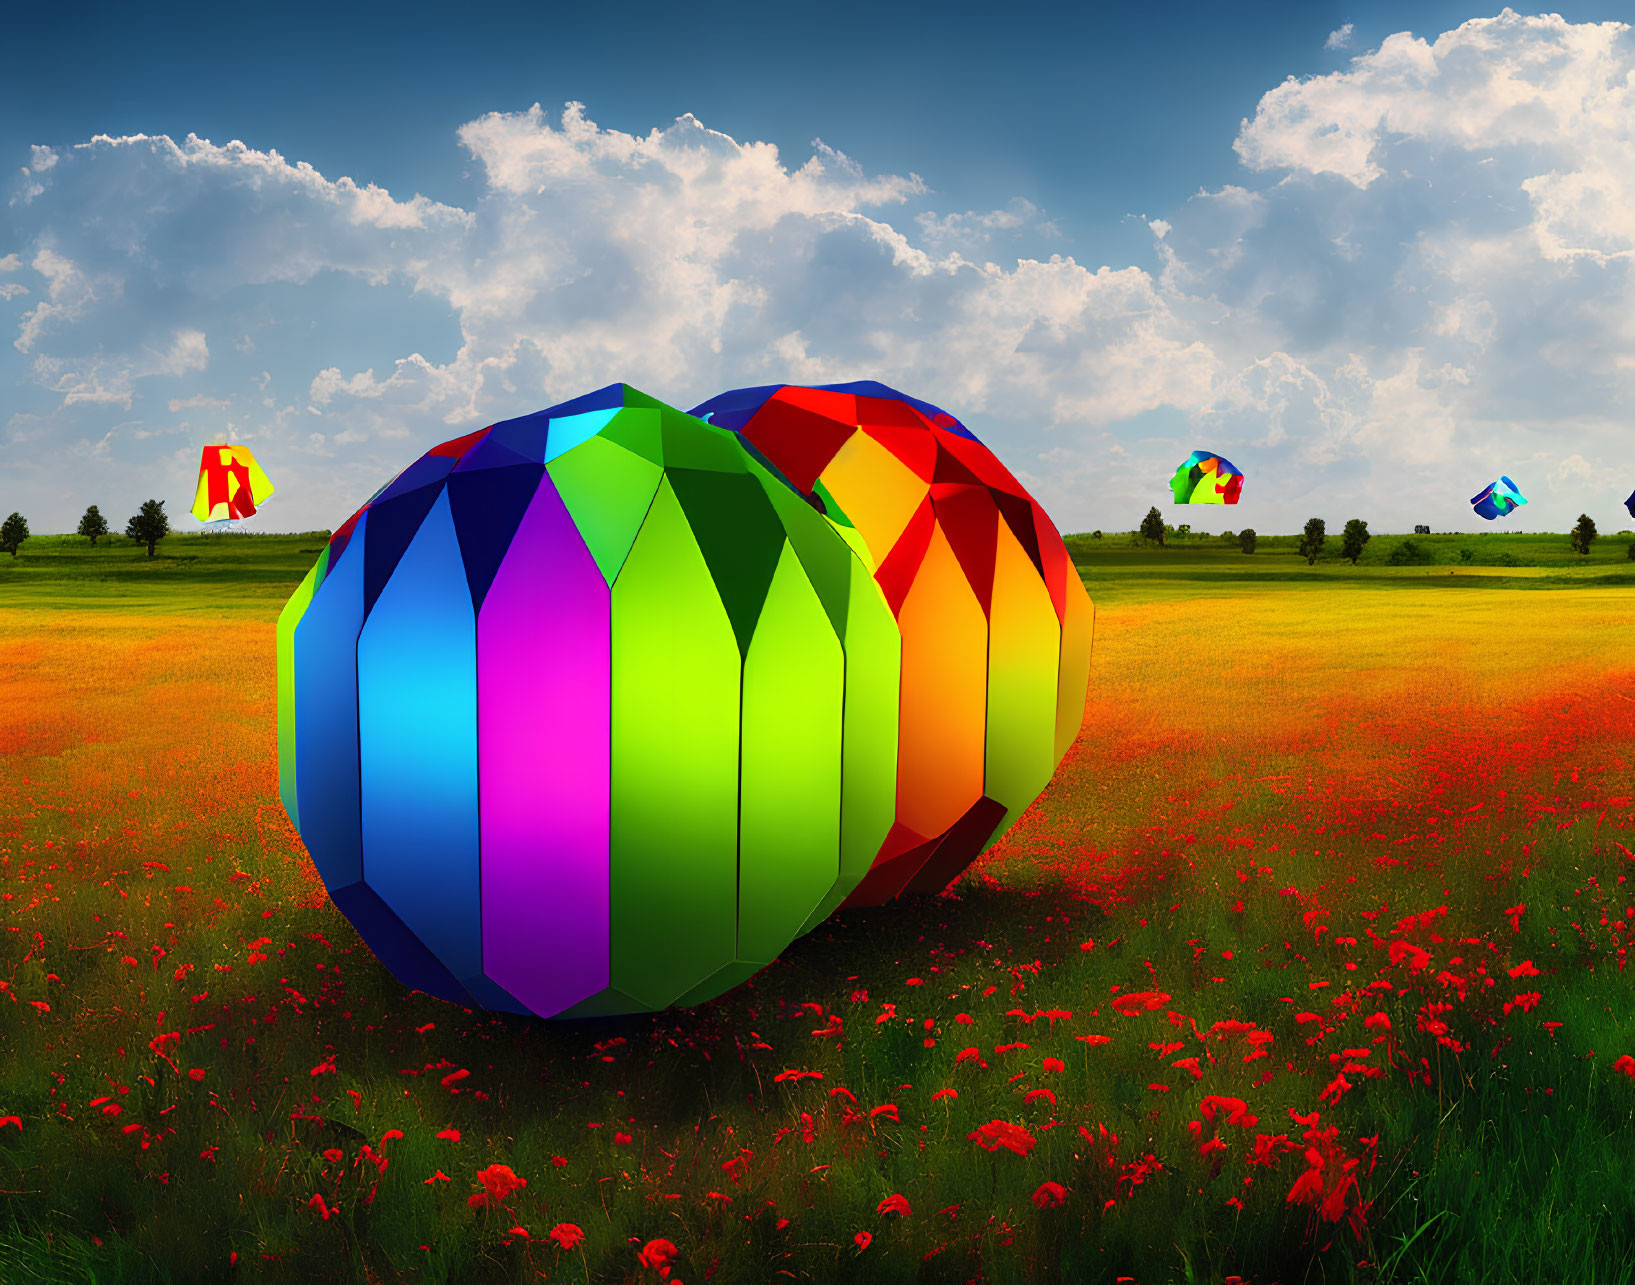 Colorful 3D gemstone shape among red poppies and kites in blue sky